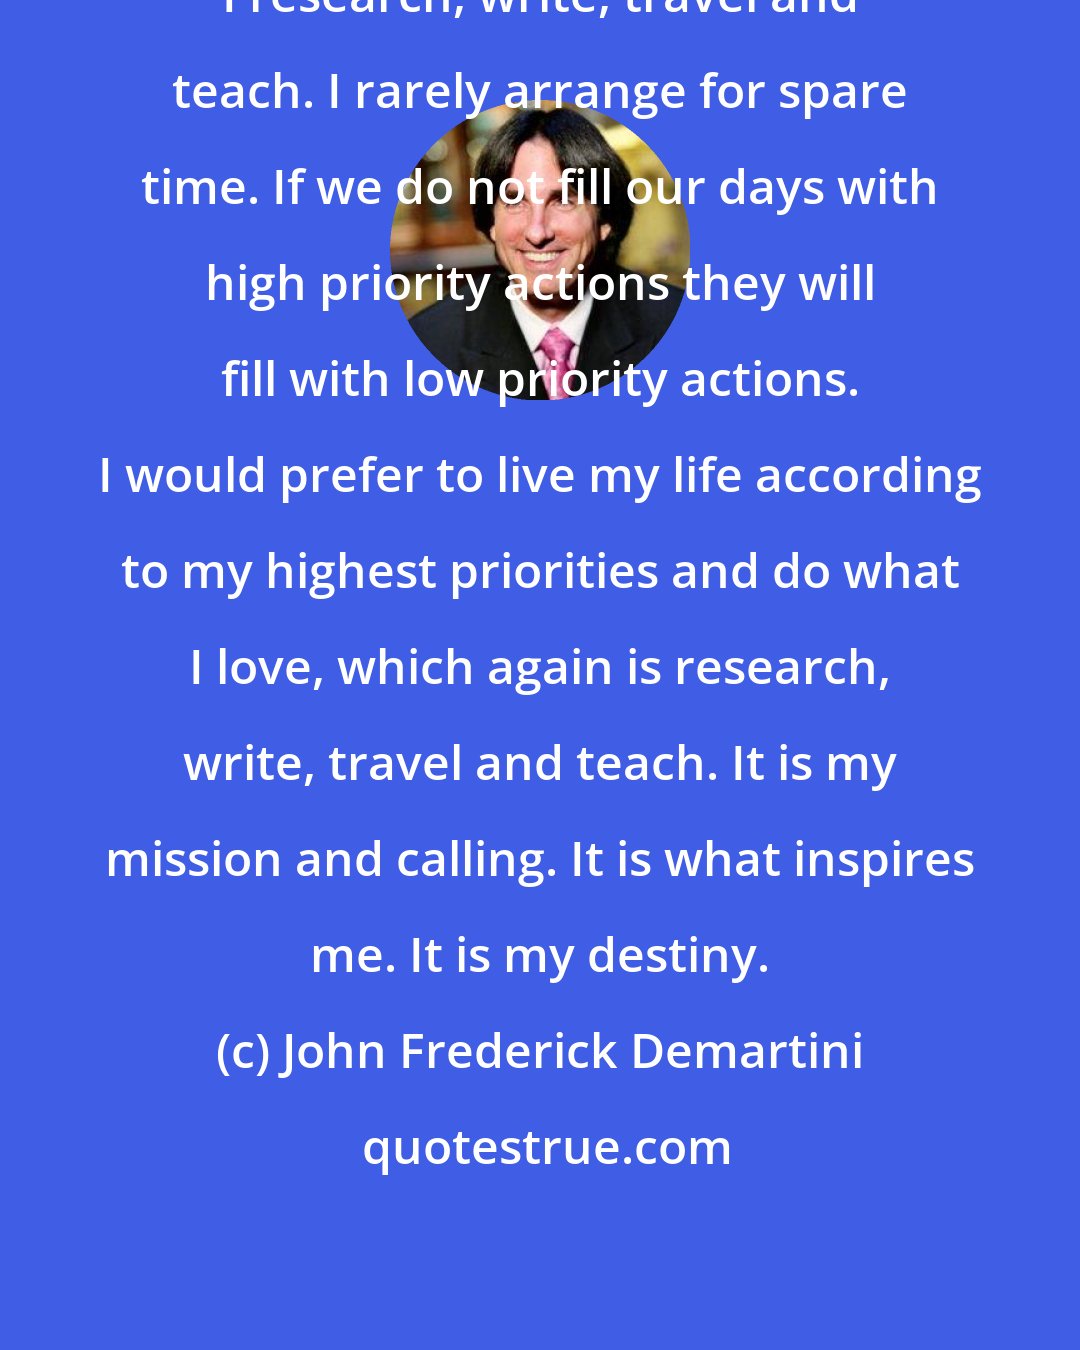 John Frederick Demartini: I research, write, travel and teach. I rarely arrange for spare time. If we do not fill our days with high priority actions they will fill with low priority actions. I would prefer to live my life according to my highest priorities and do what I love, which again is research, write, travel and teach. It is my mission and calling. It is what inspires me. It is my destiny.